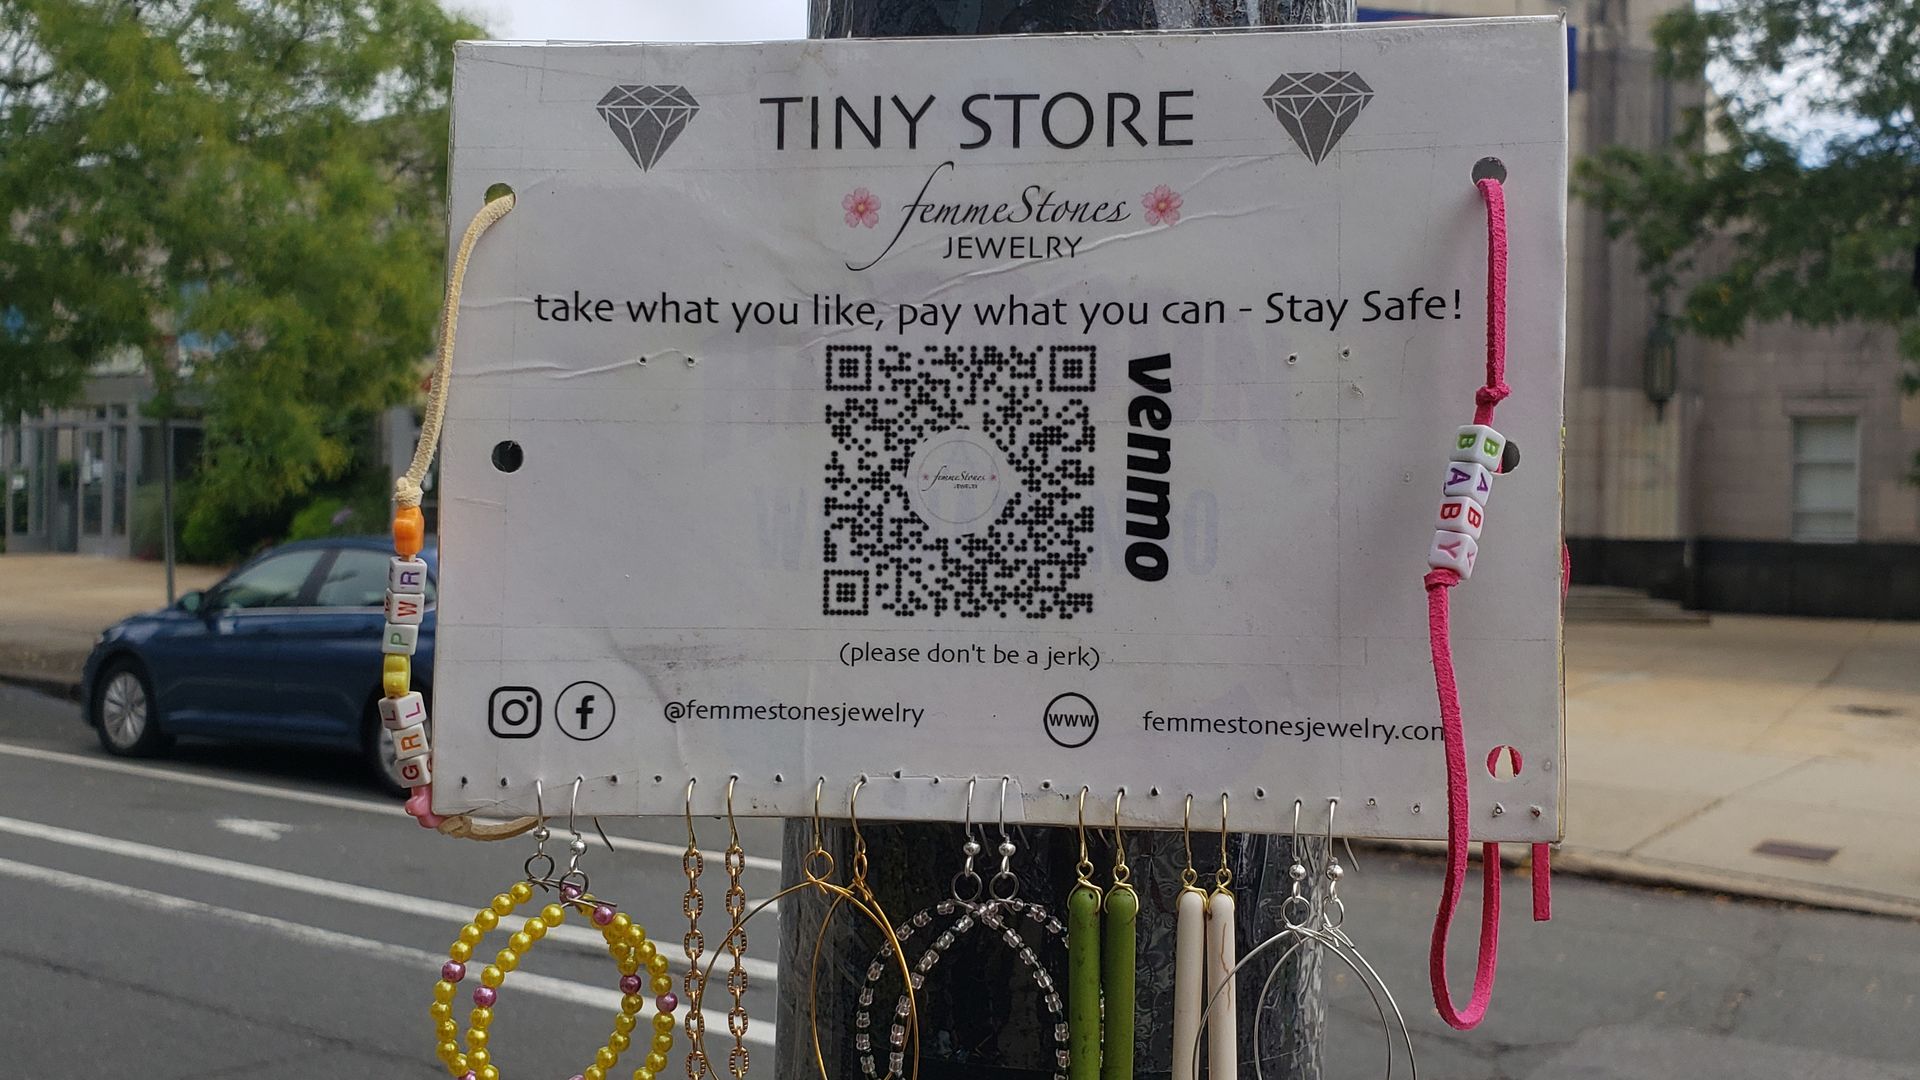 Some innovative commerce in Somerville, MA - a Venmo store pinned to a traffic light.